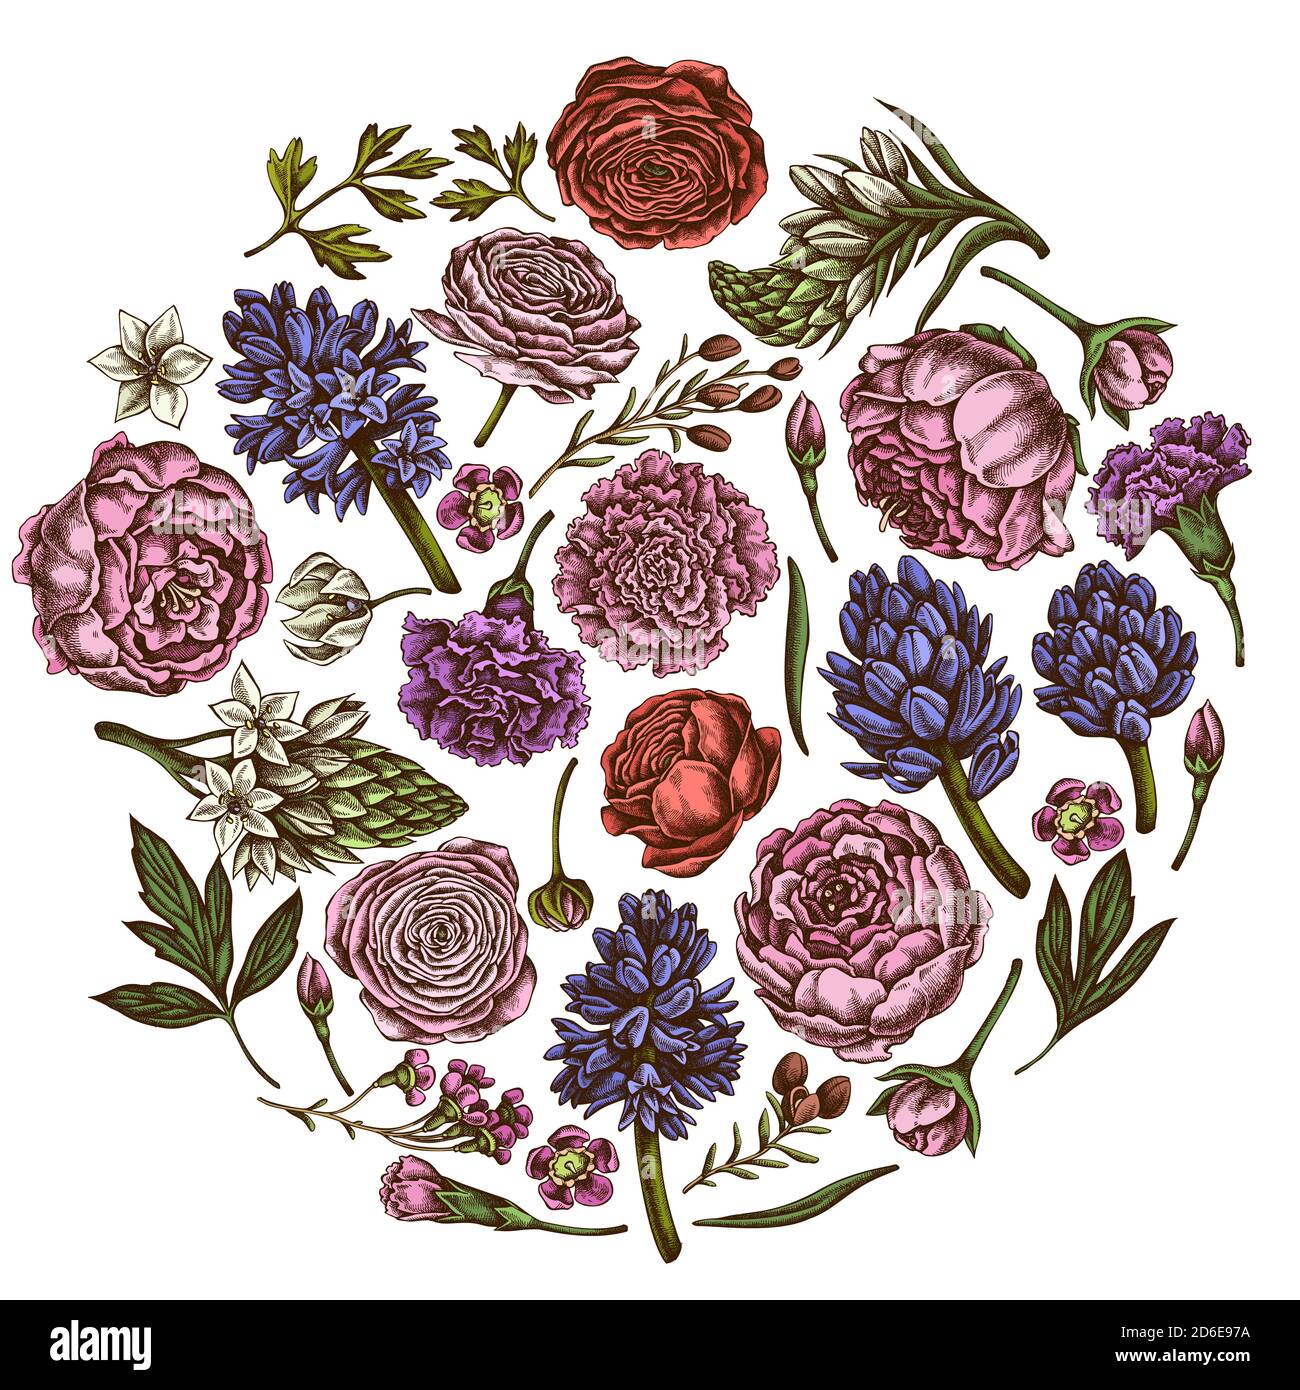 Round floral design with colored peony, carnation, ranunculus, wax flower, ornithogalum, hyacinth Stock Vector